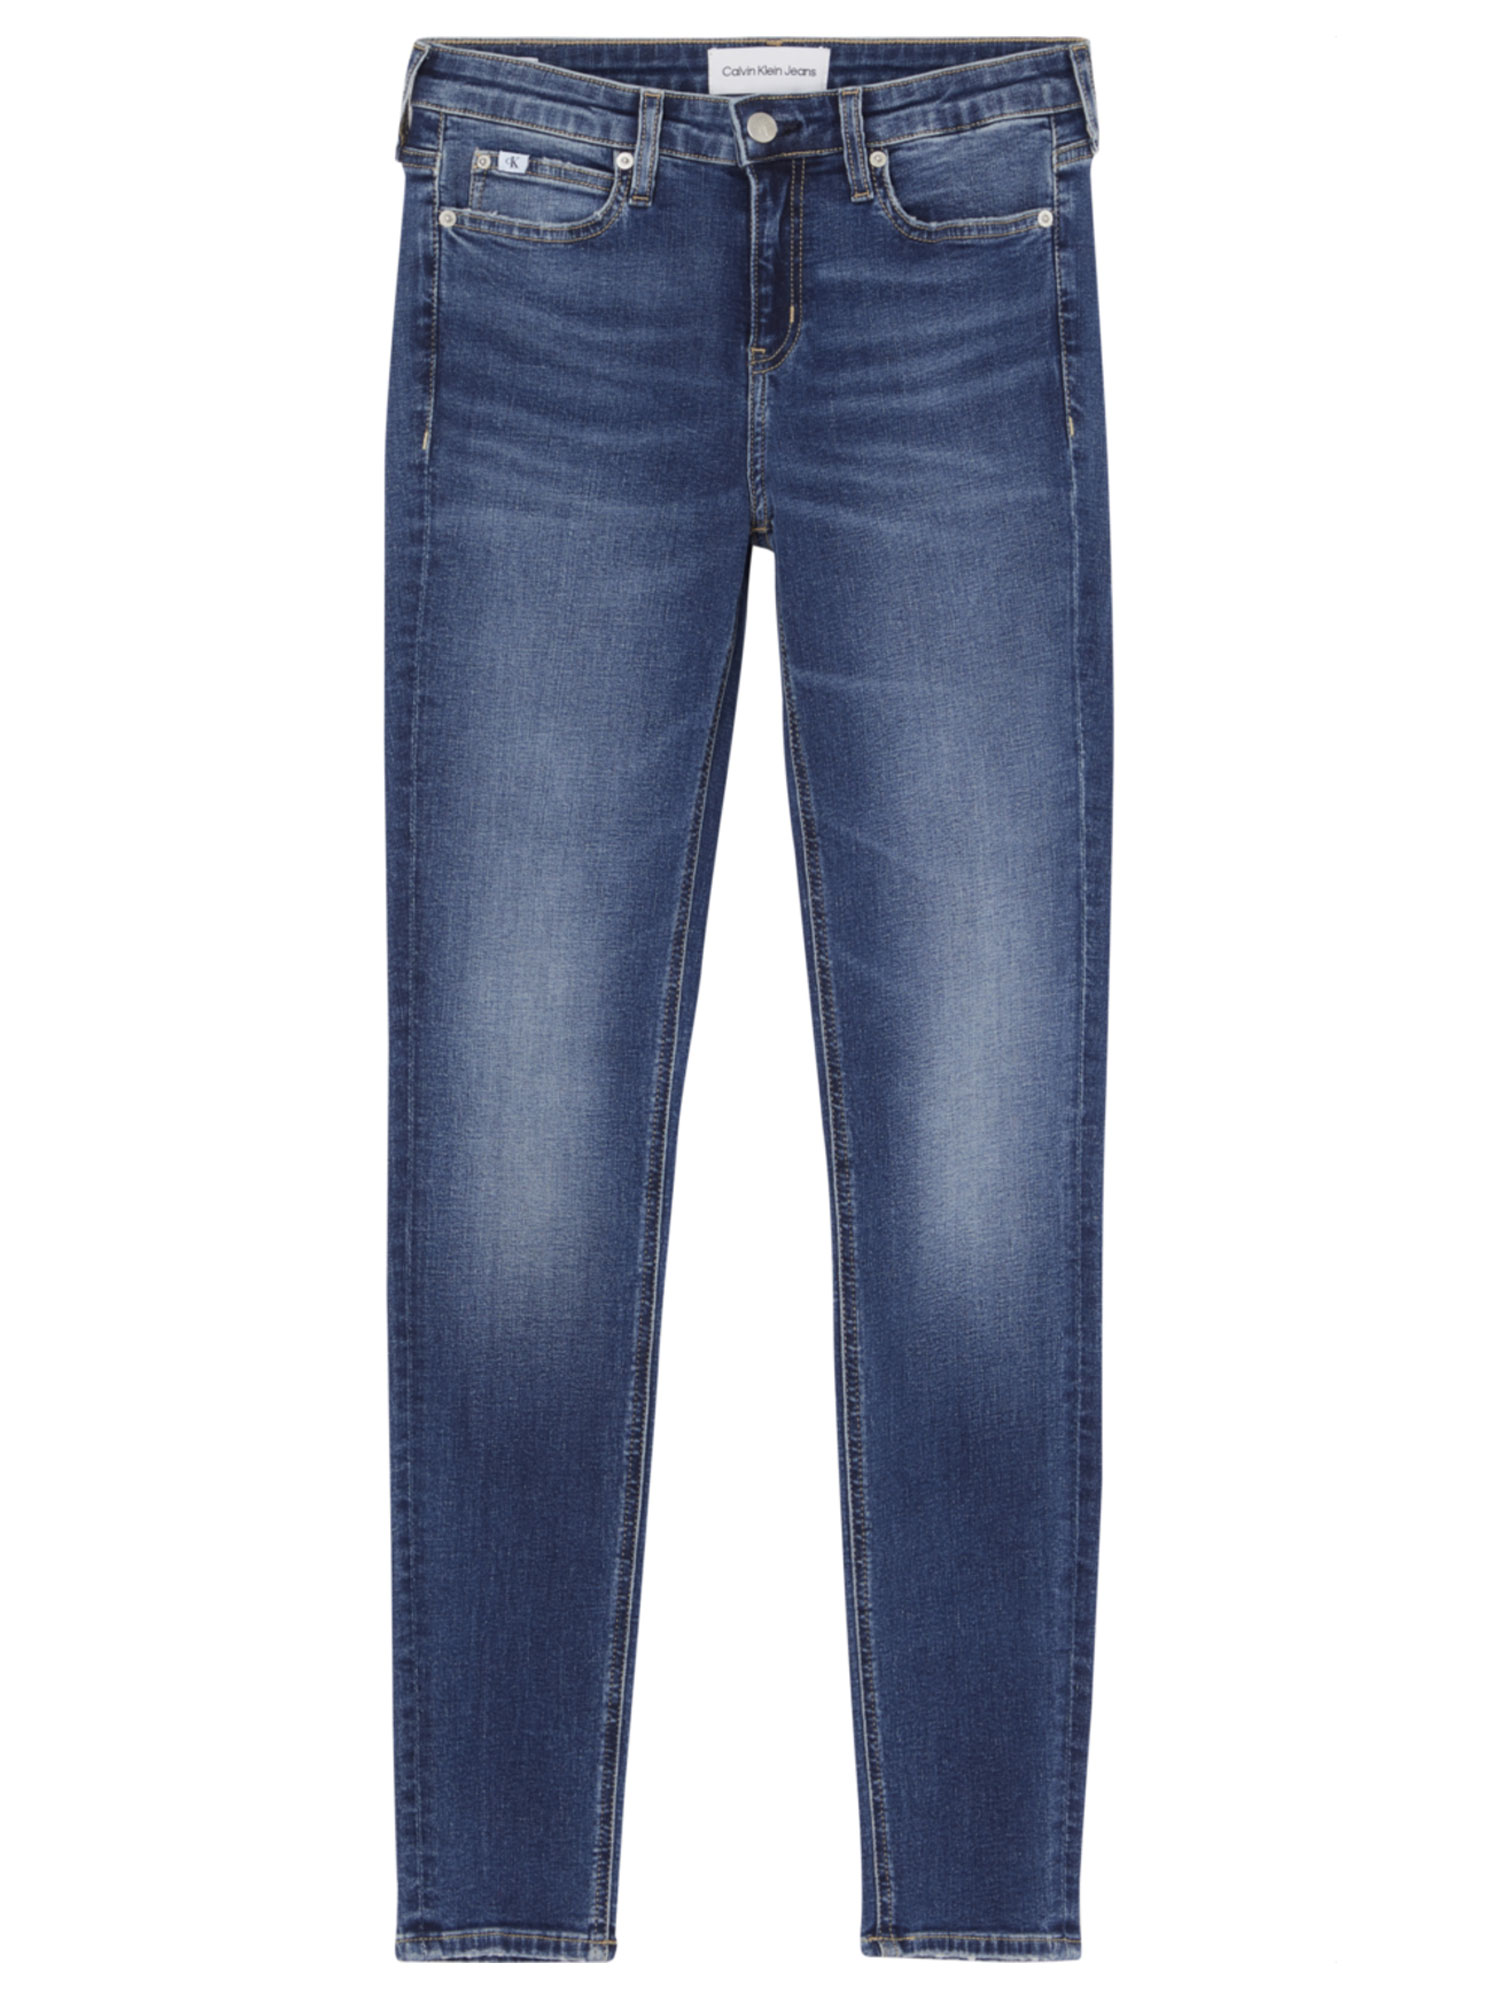 CK MID RISE SKINNY - JEANS